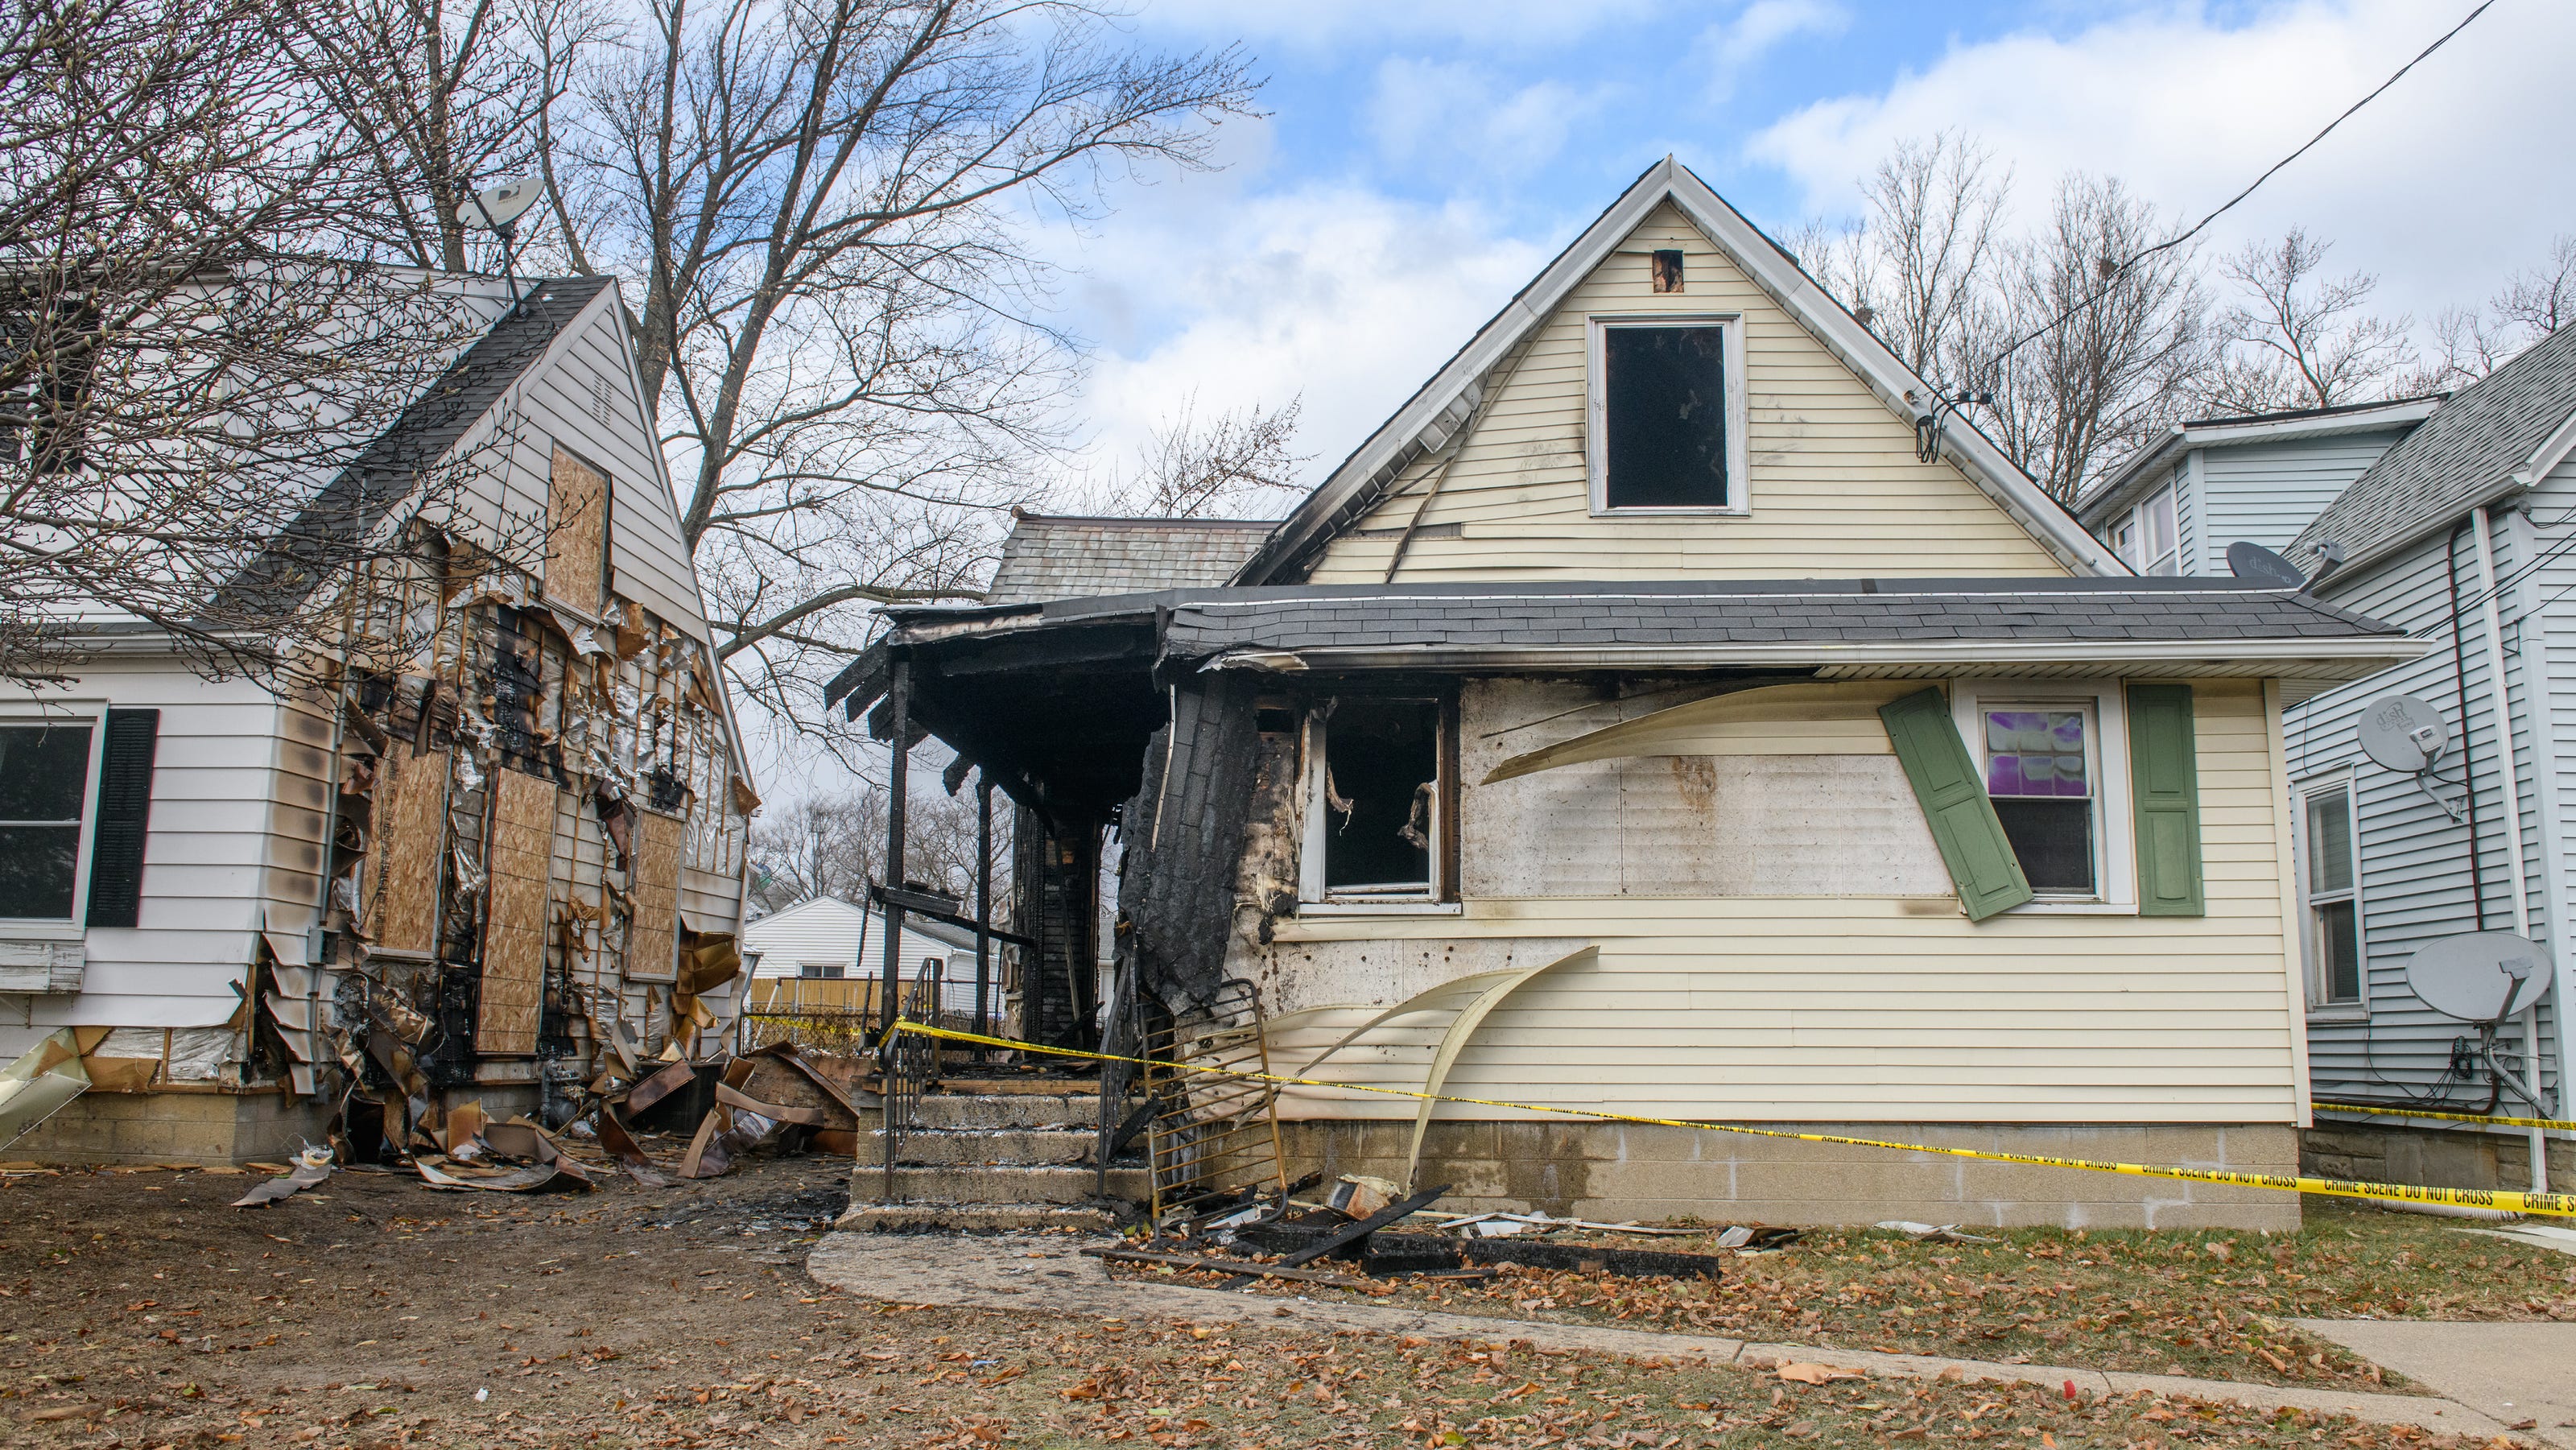  Coroner identifies man who died in Peoria Heights house fire and releases cause of death 